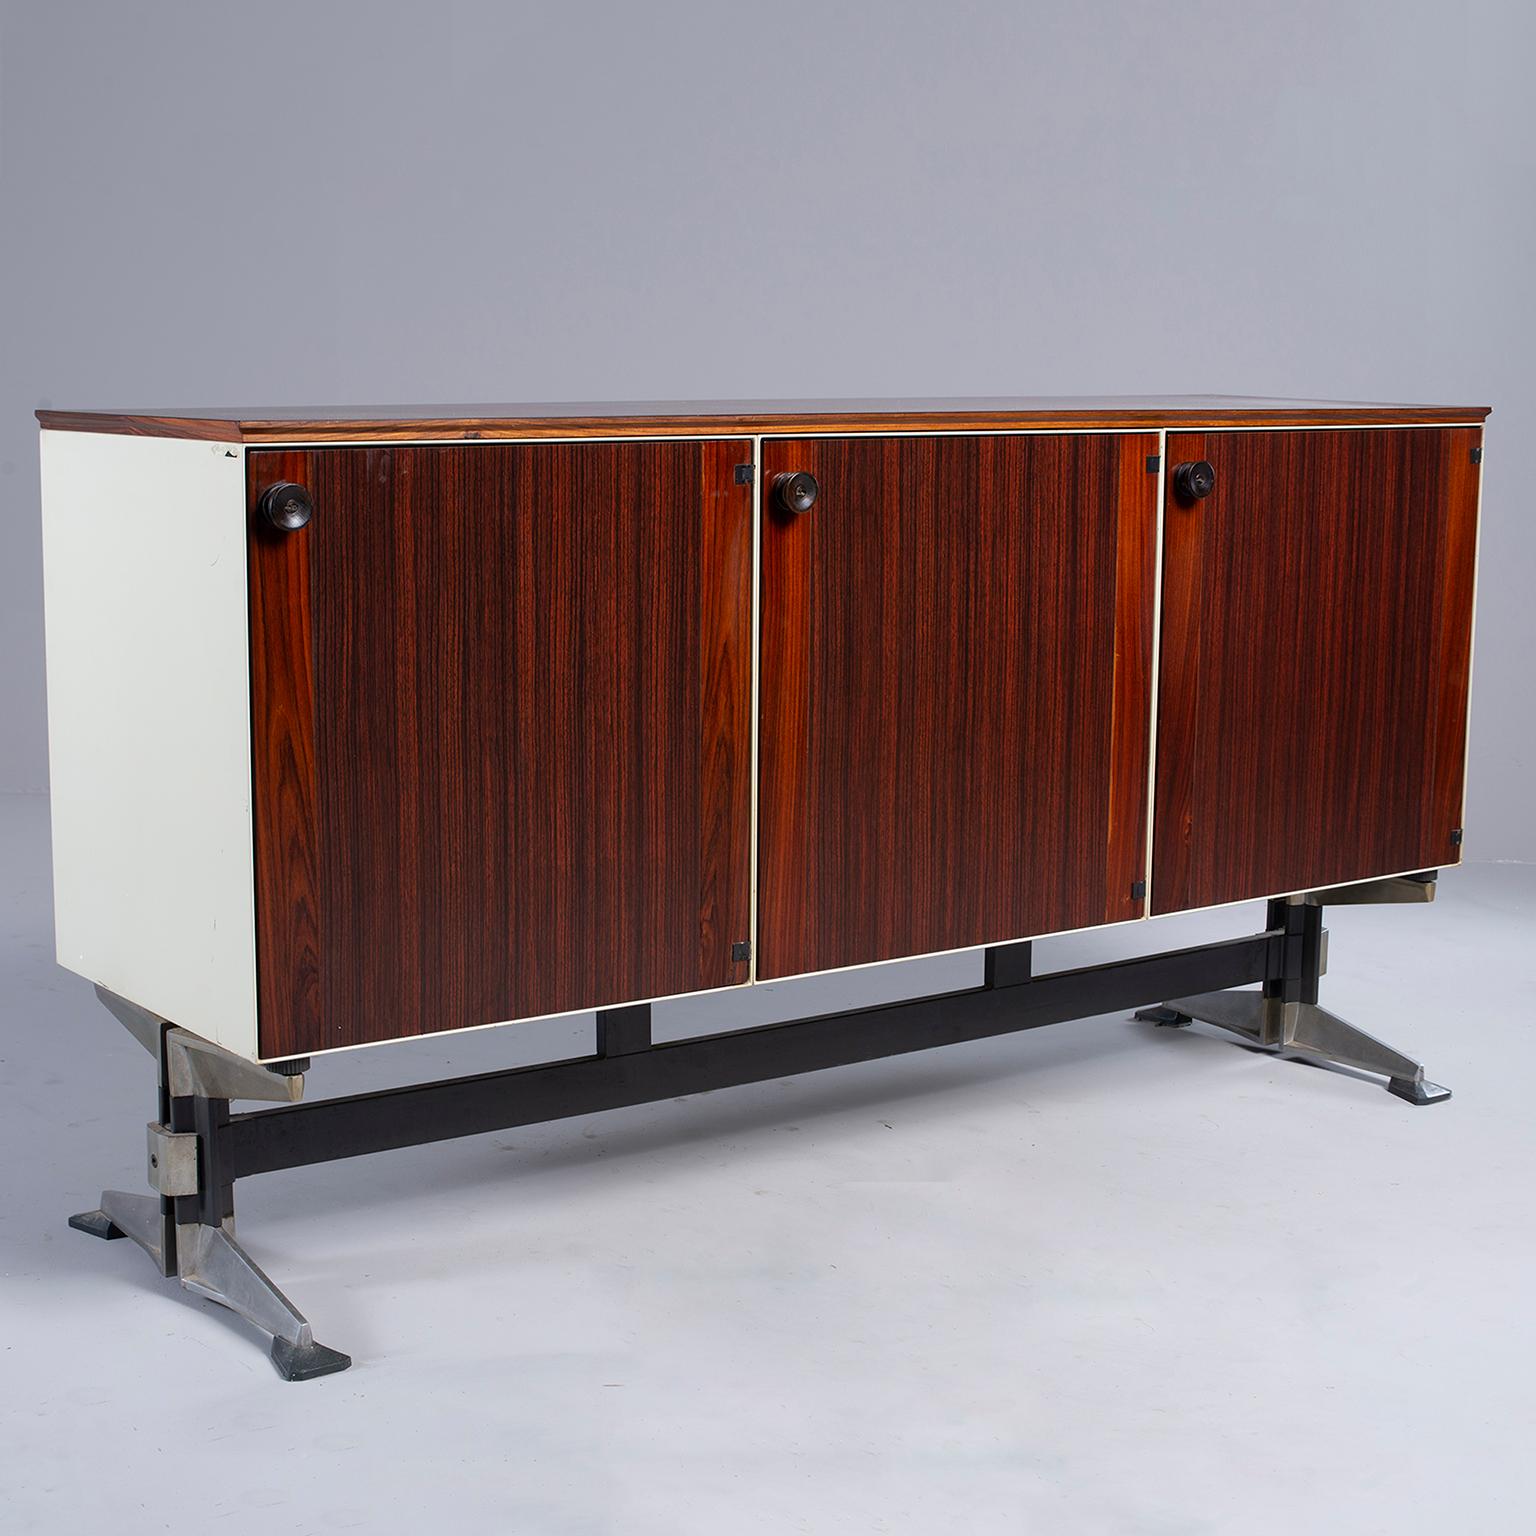 Cabinet or credenza has rosewood veneer front and top with three hinged door compartments with internal shelves, circa 1960s. Black stretcher with splayed metal feet. Sides and back of cabinet have a painted ivory colored finish. Depth measurement